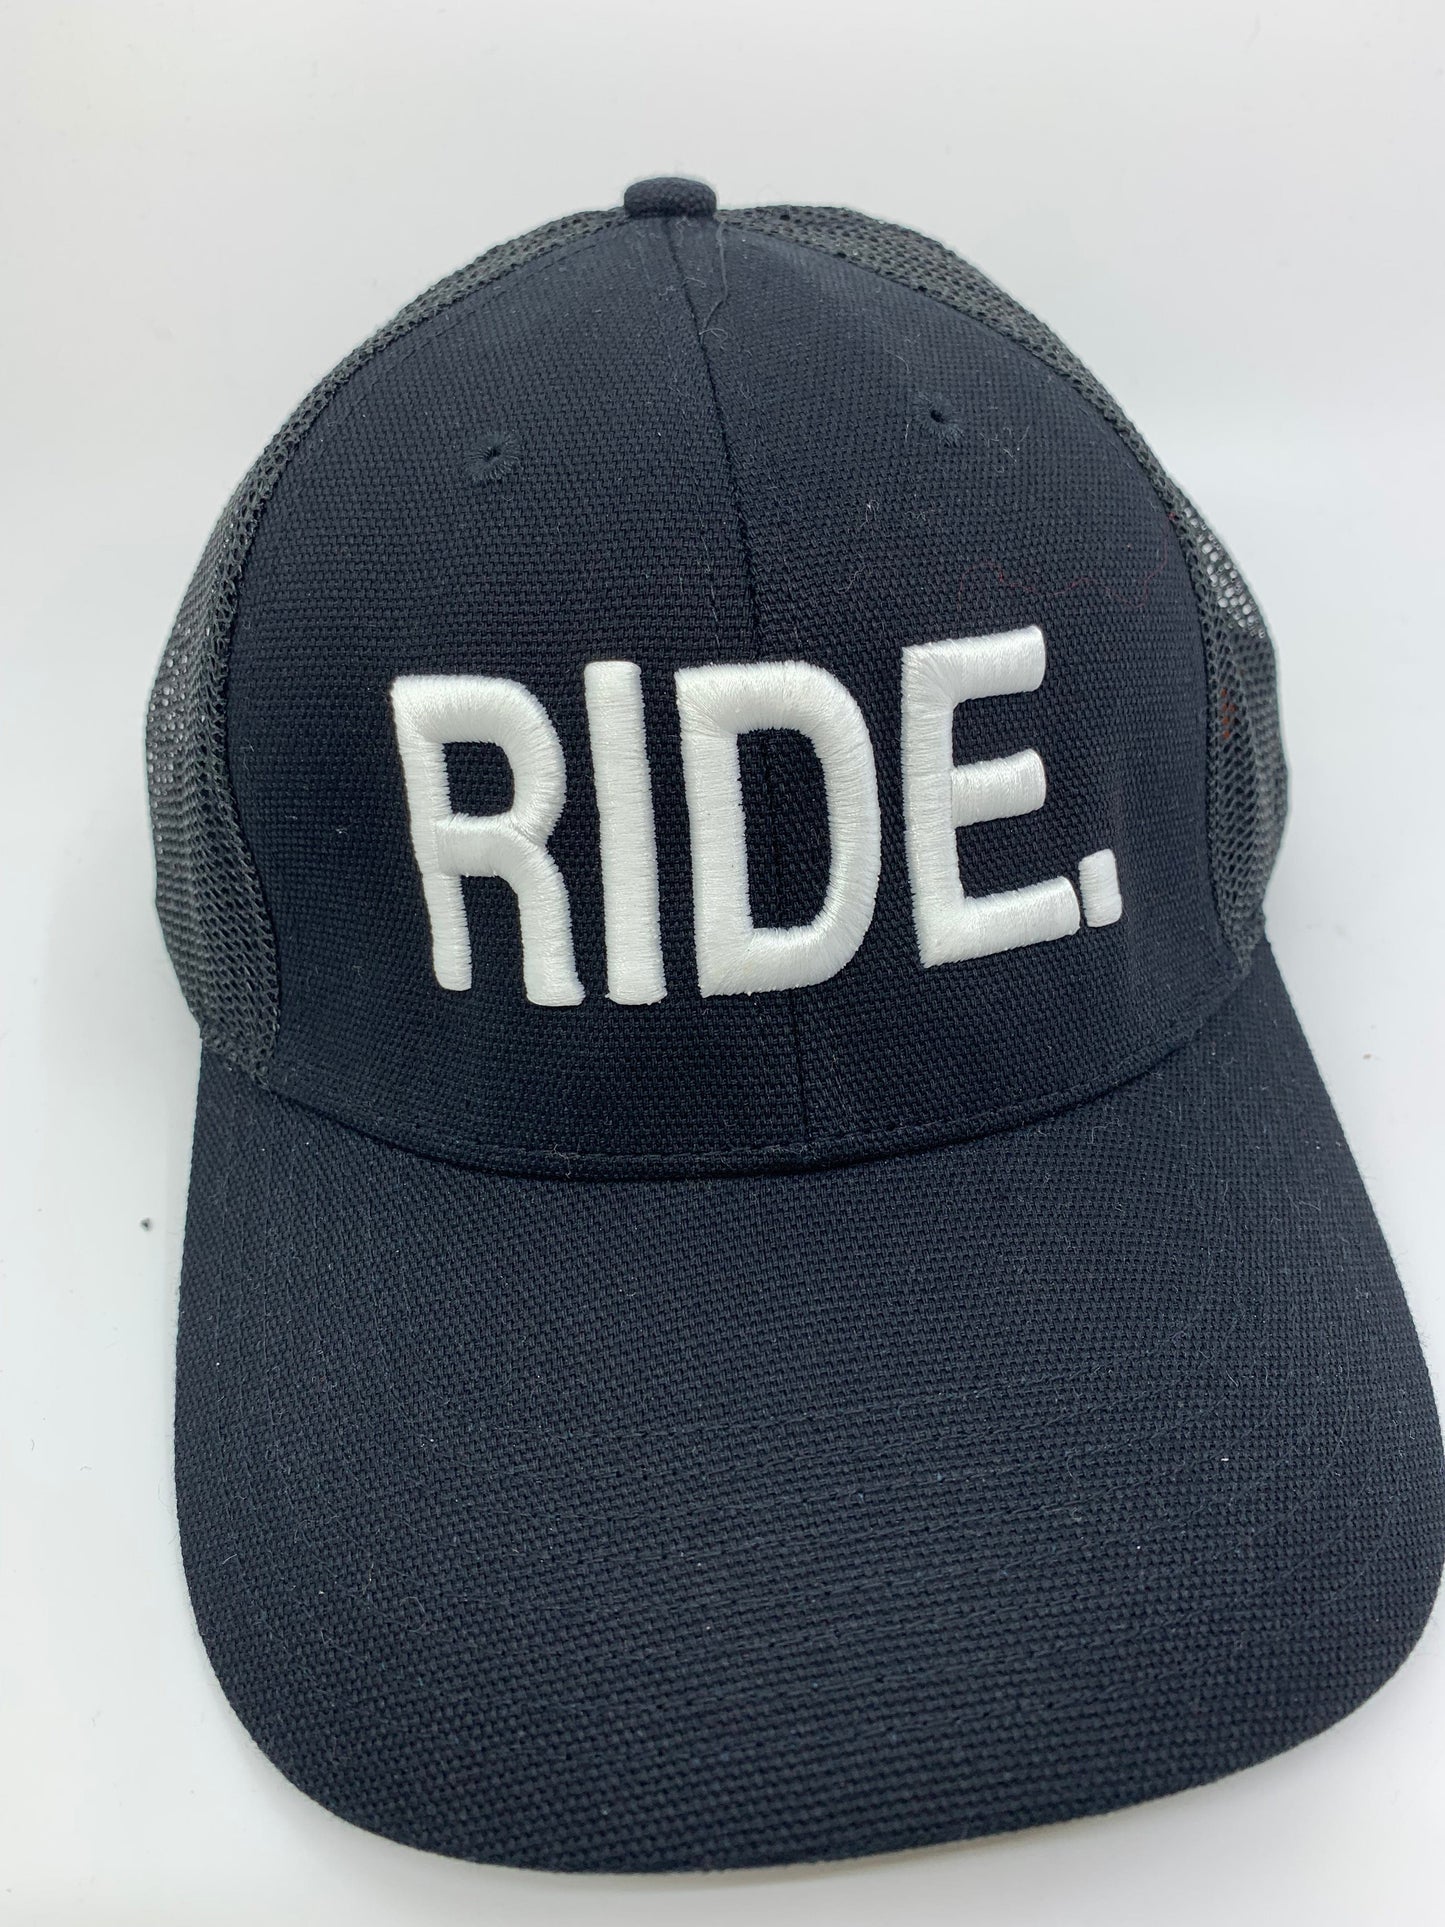 Equestrian Team Apparel Custom Team Hats Trucker Cap-RIDE. equestrian team apparel online tack store mobile tack store custom farm apparel custom show stable clothing equestrian lifestyle horse show clothing riding clothes horses equestrian tack store